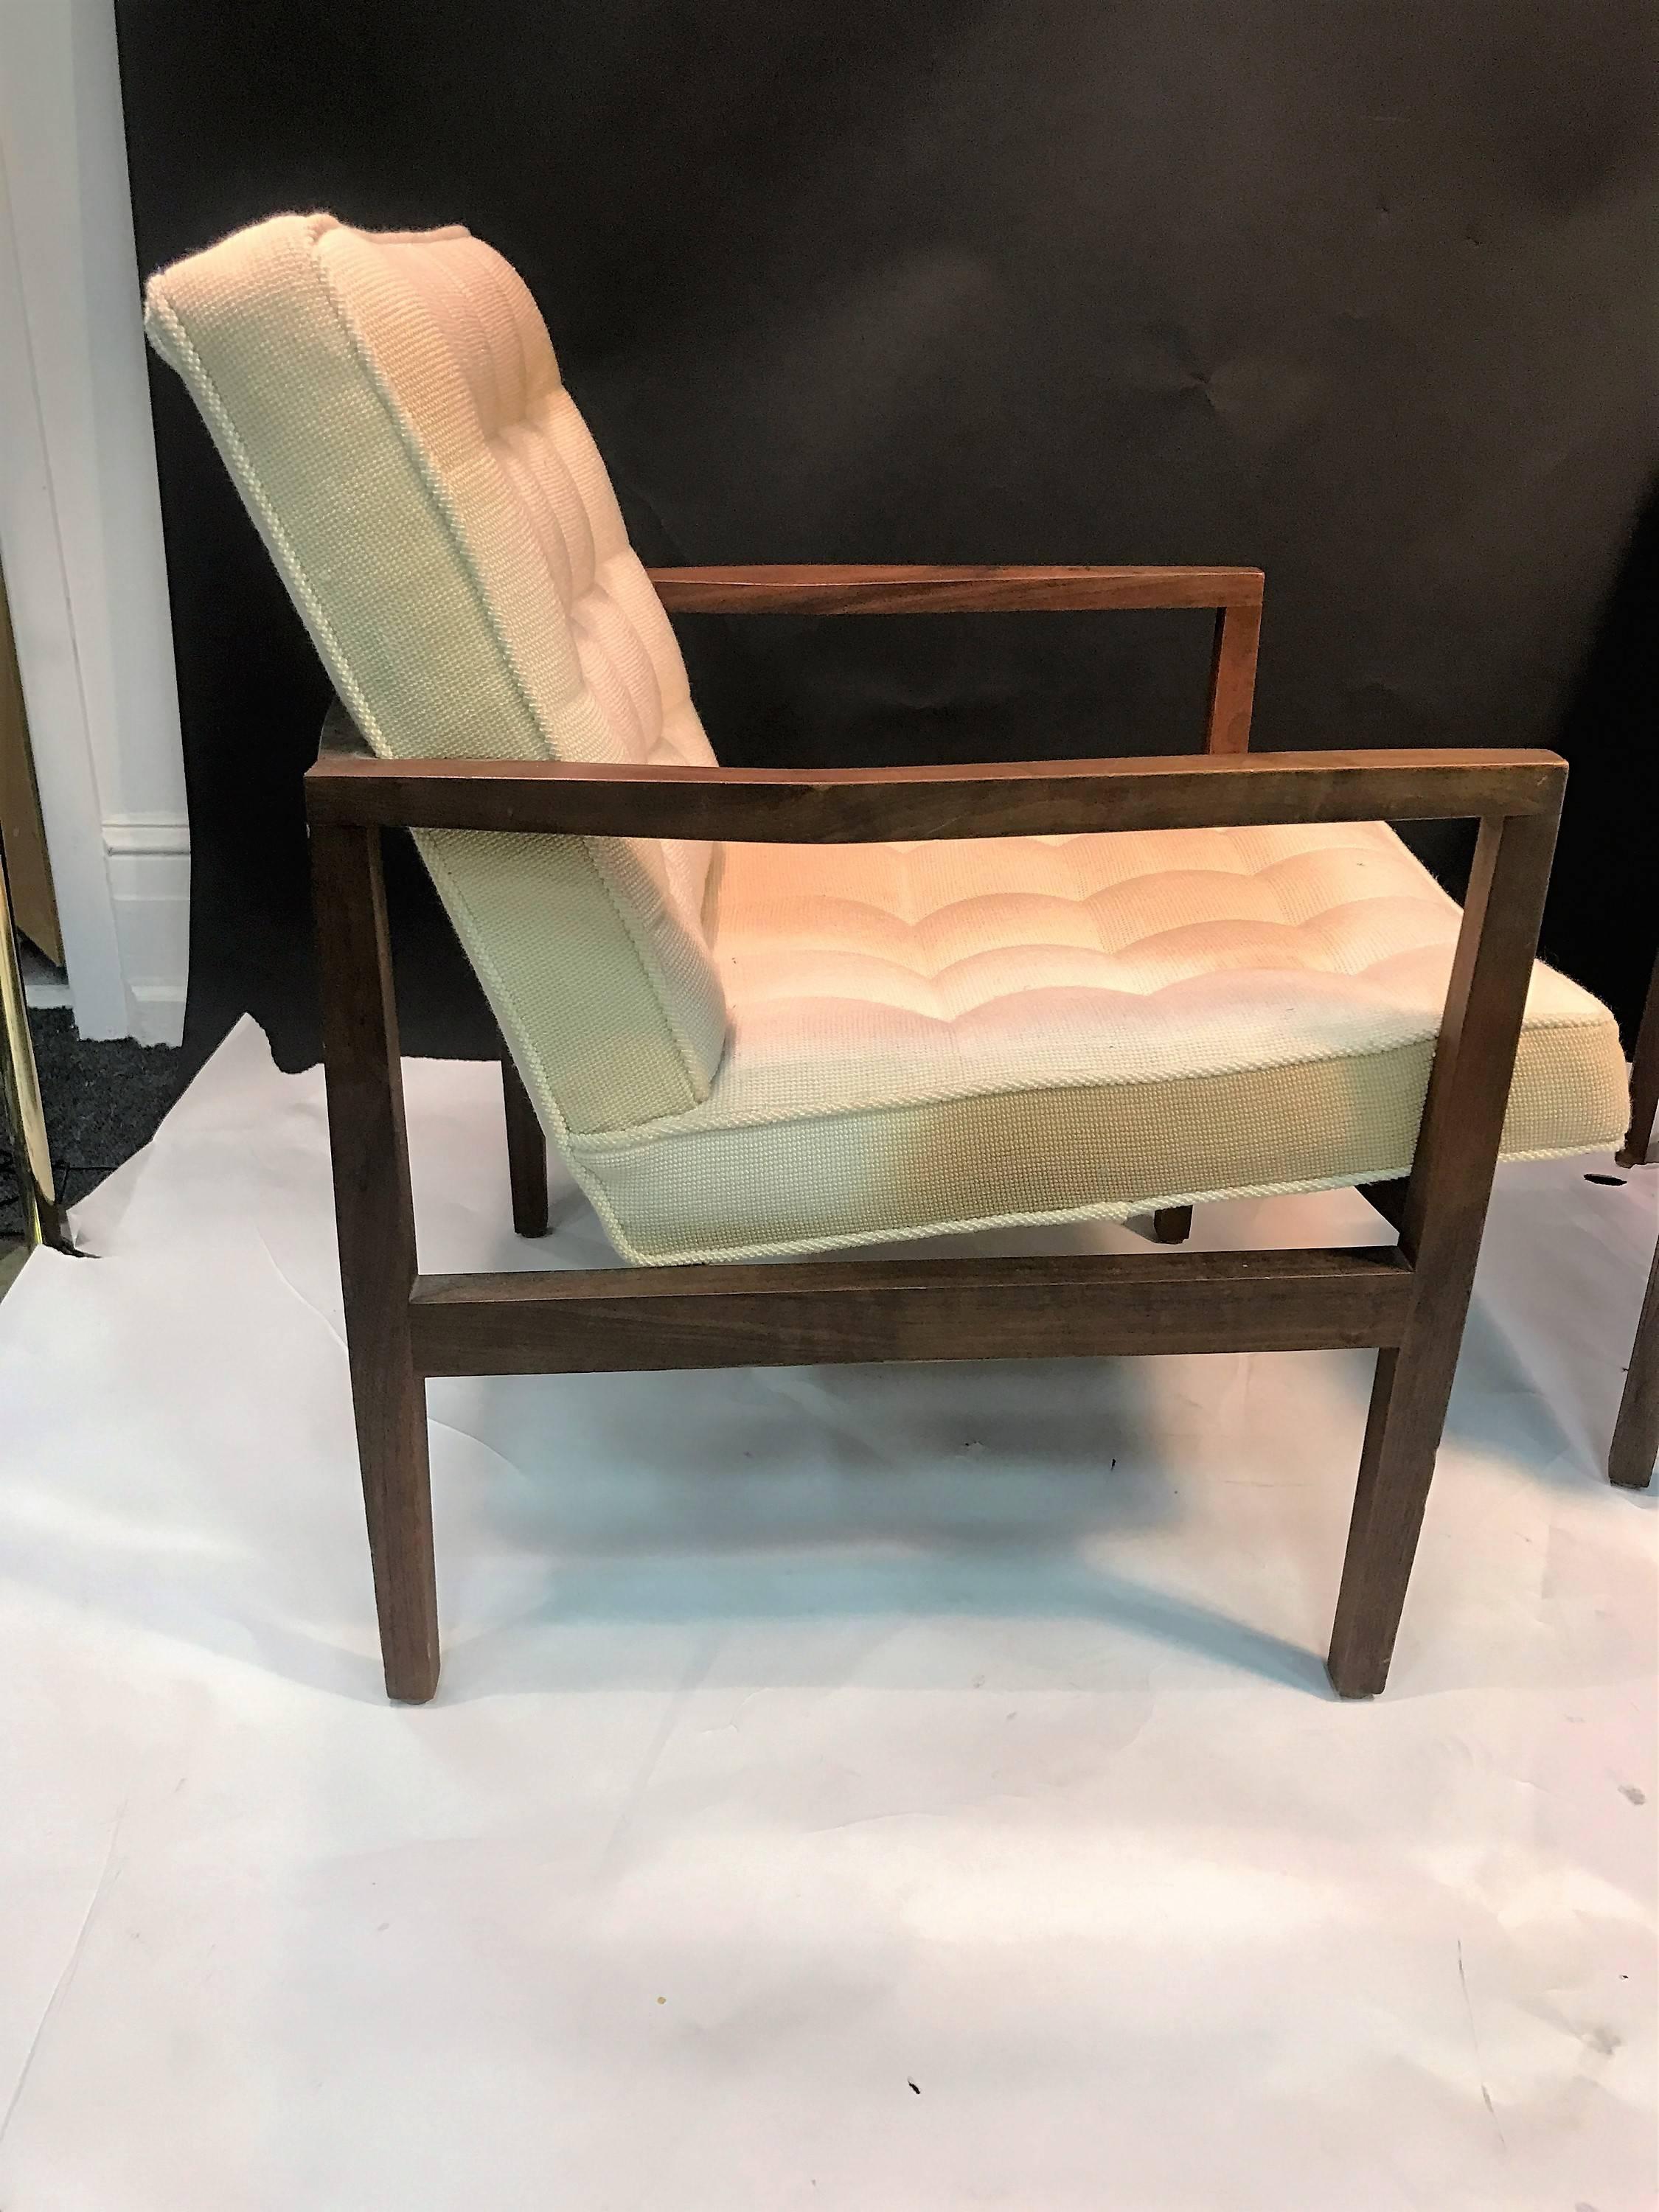 Sharp Pair of Mid-Century Modern Armchairs Attributed to Edward Wormley In Excellent Condition For Sale In Mount Penn, PA